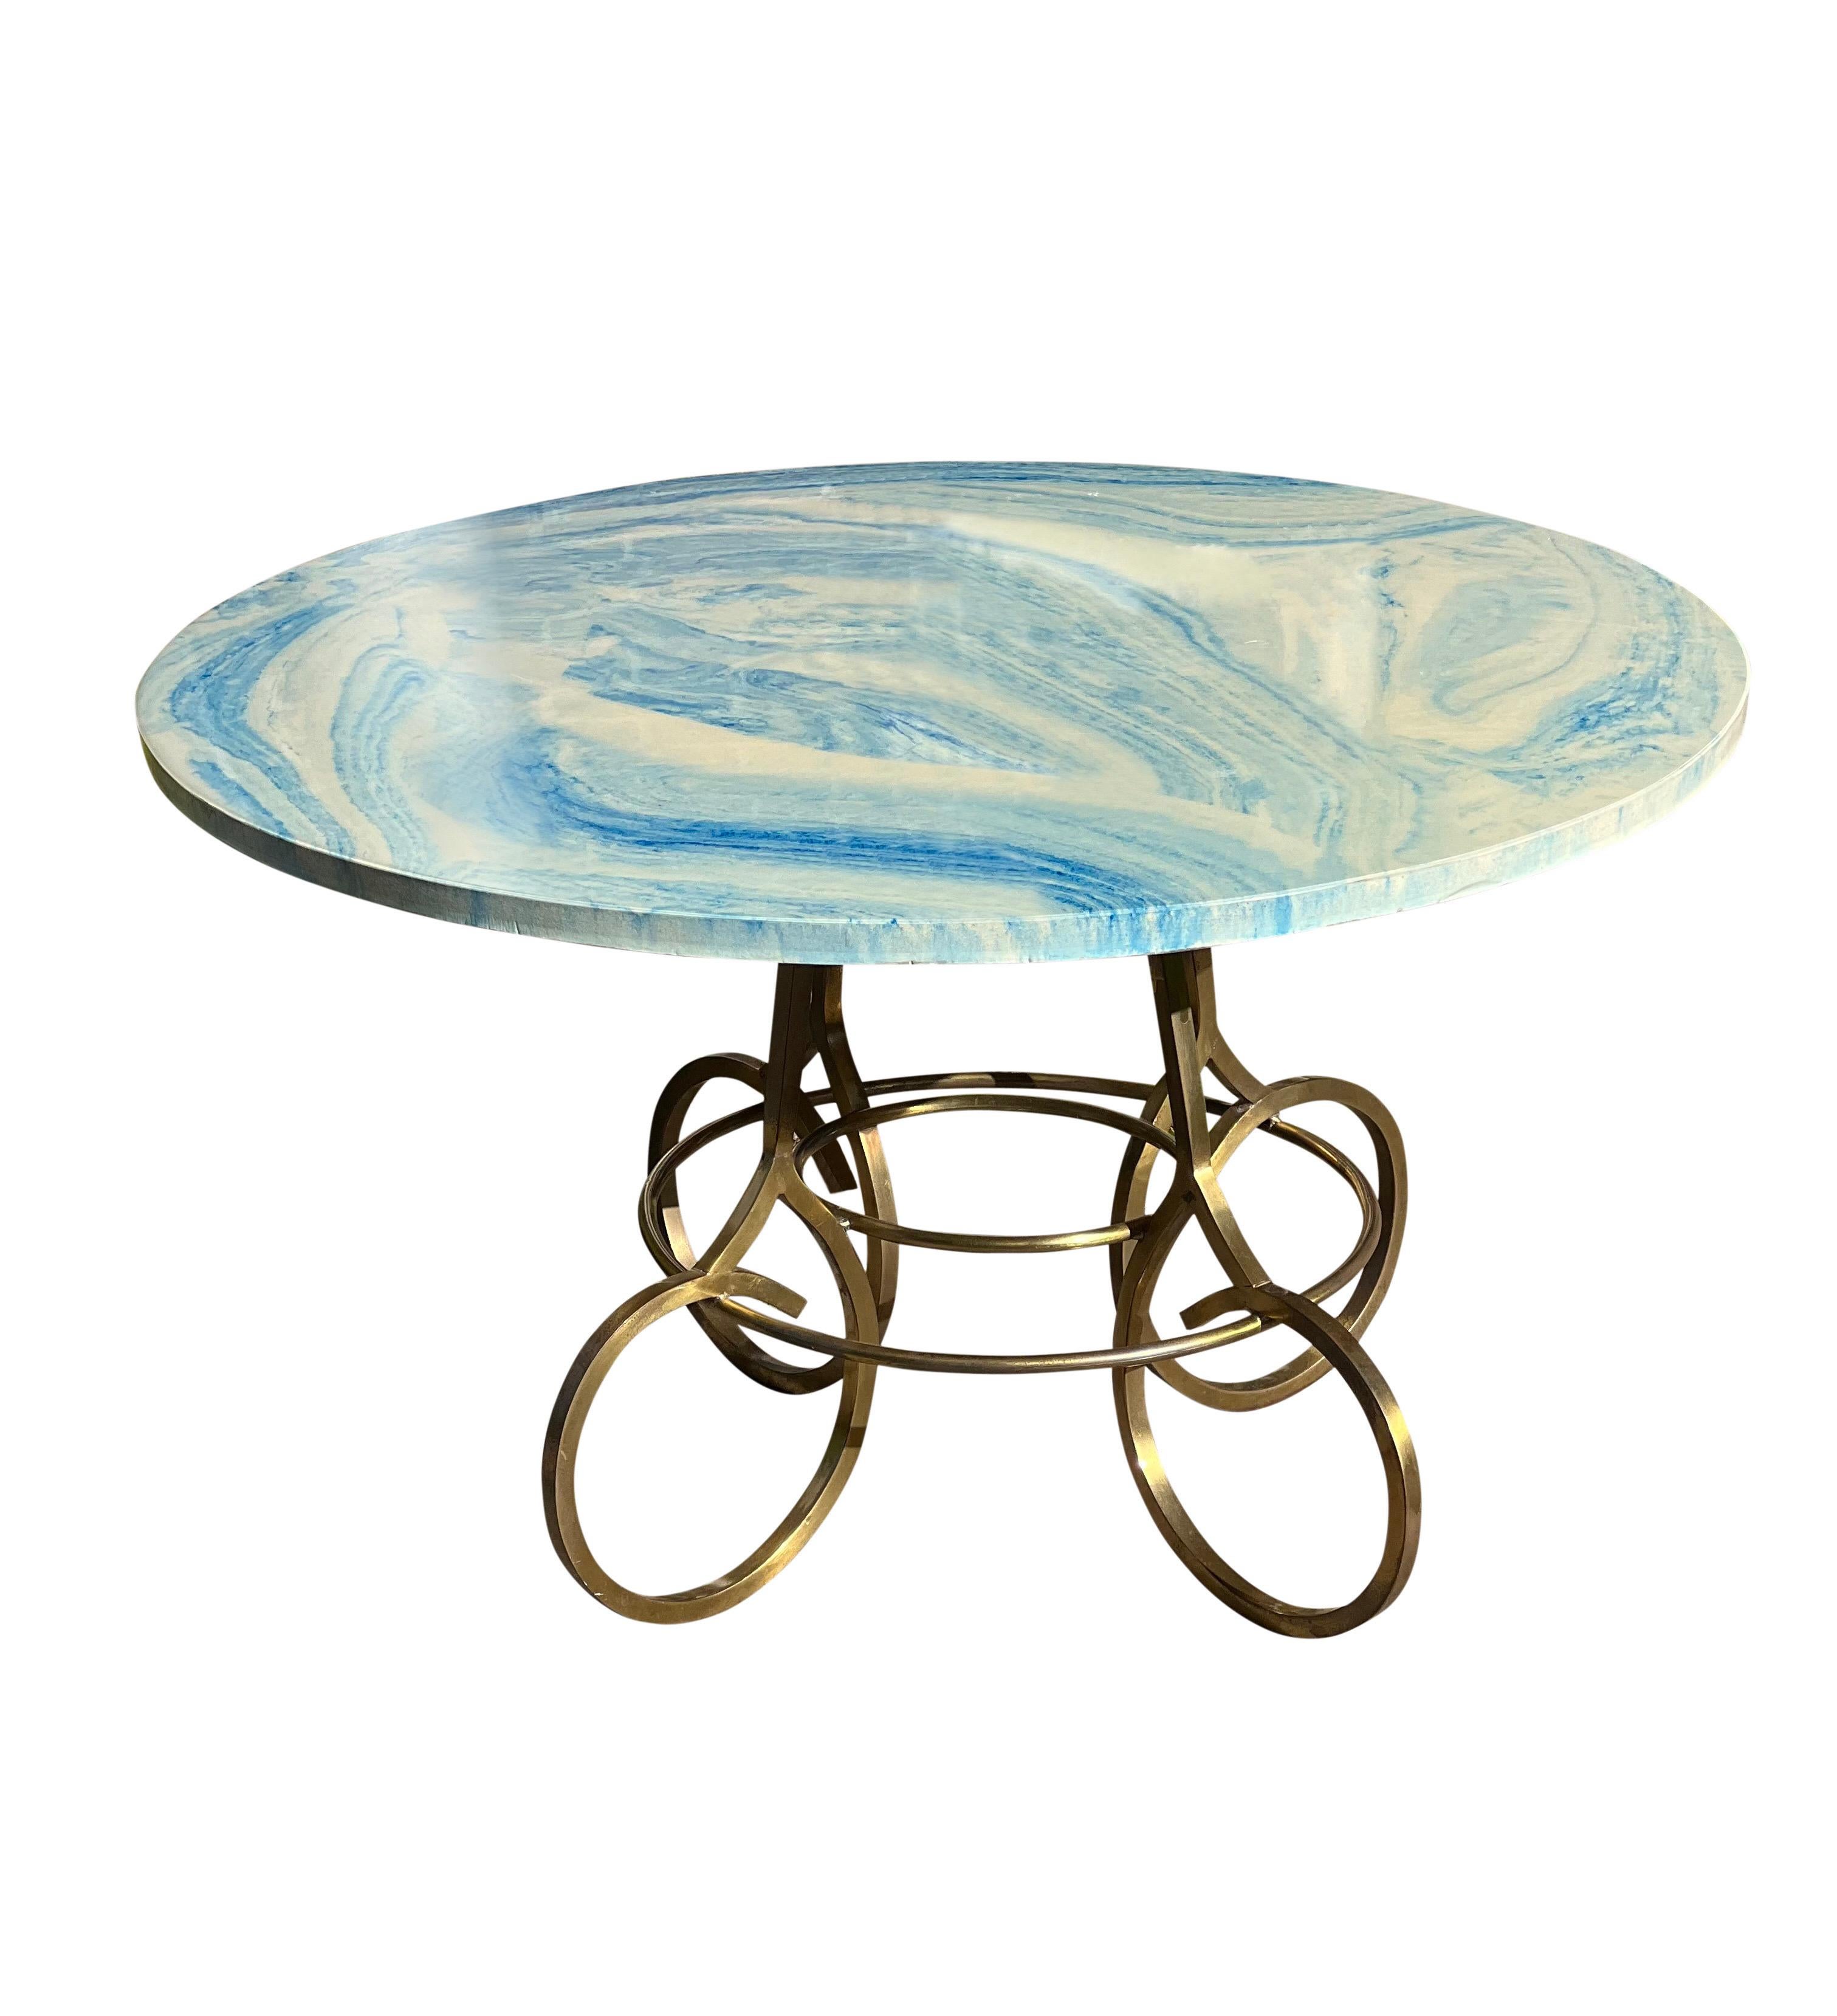 Vintage French Garden Brass and Marbleized Resin Coffee Table For Sale 4